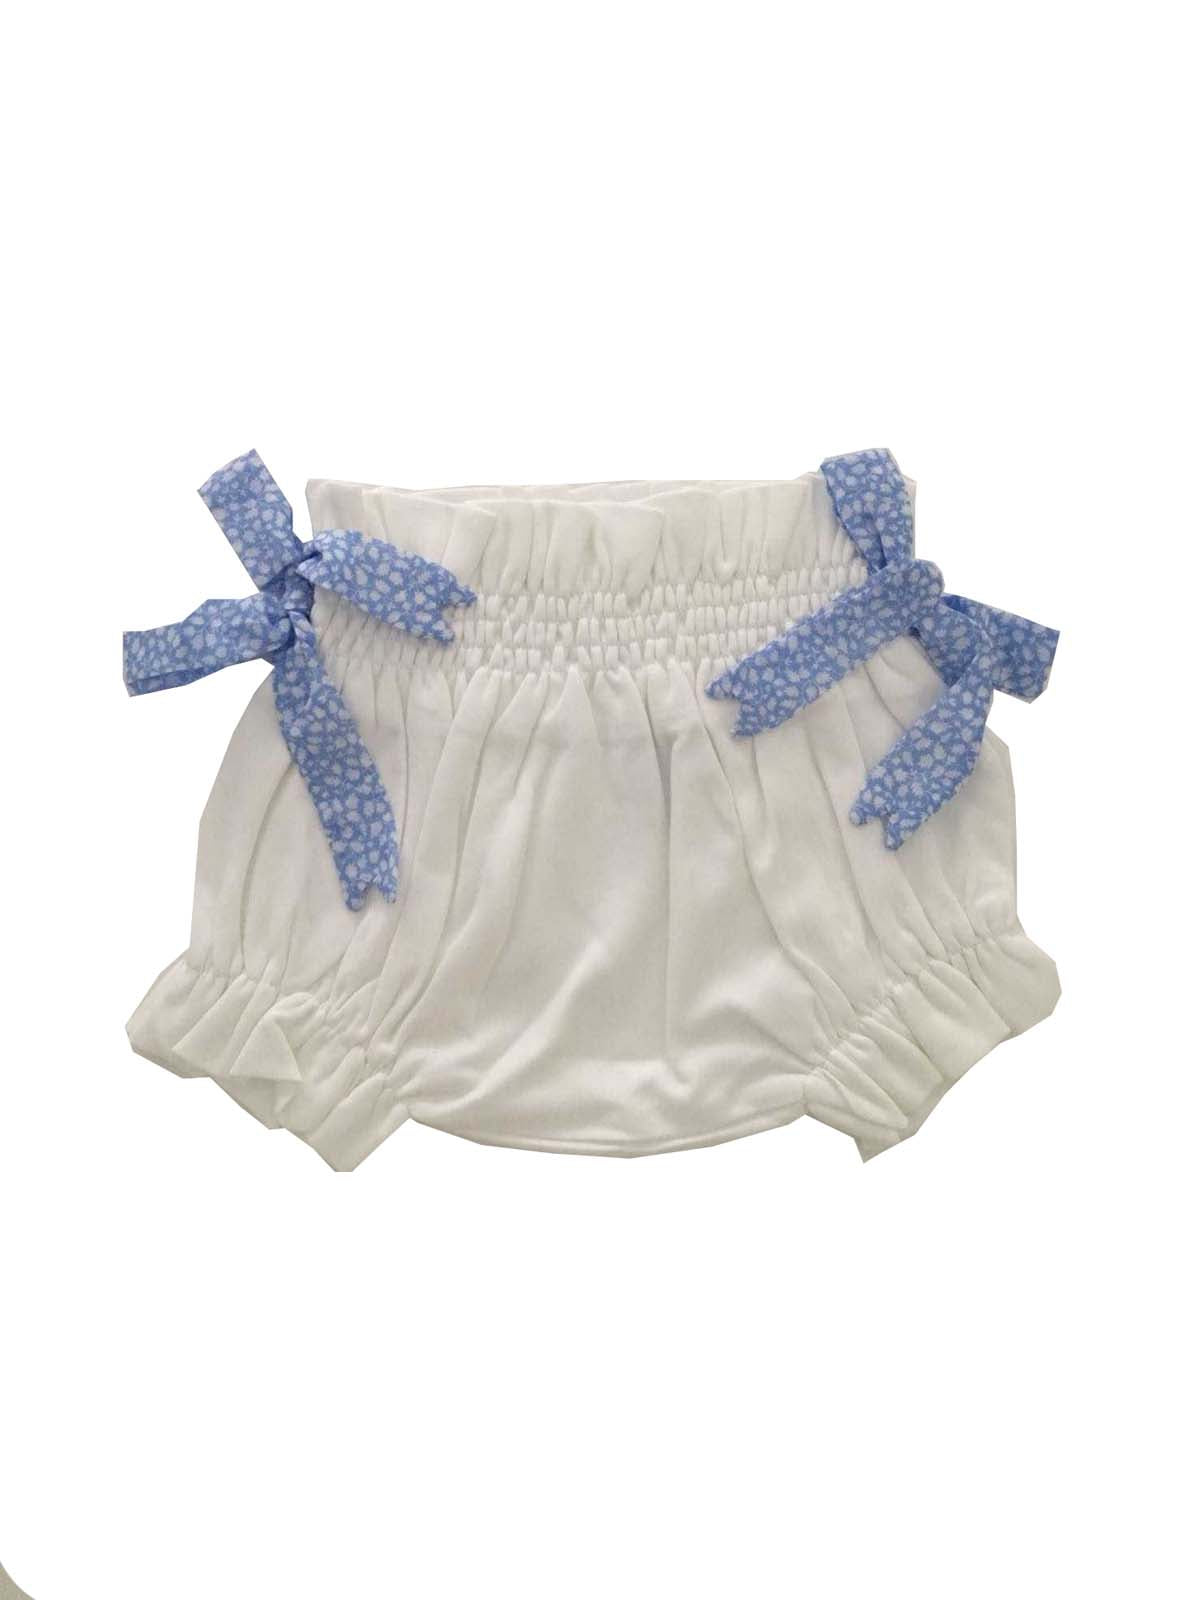 Baby Culotte Infant and toddler; blue liberty flowers